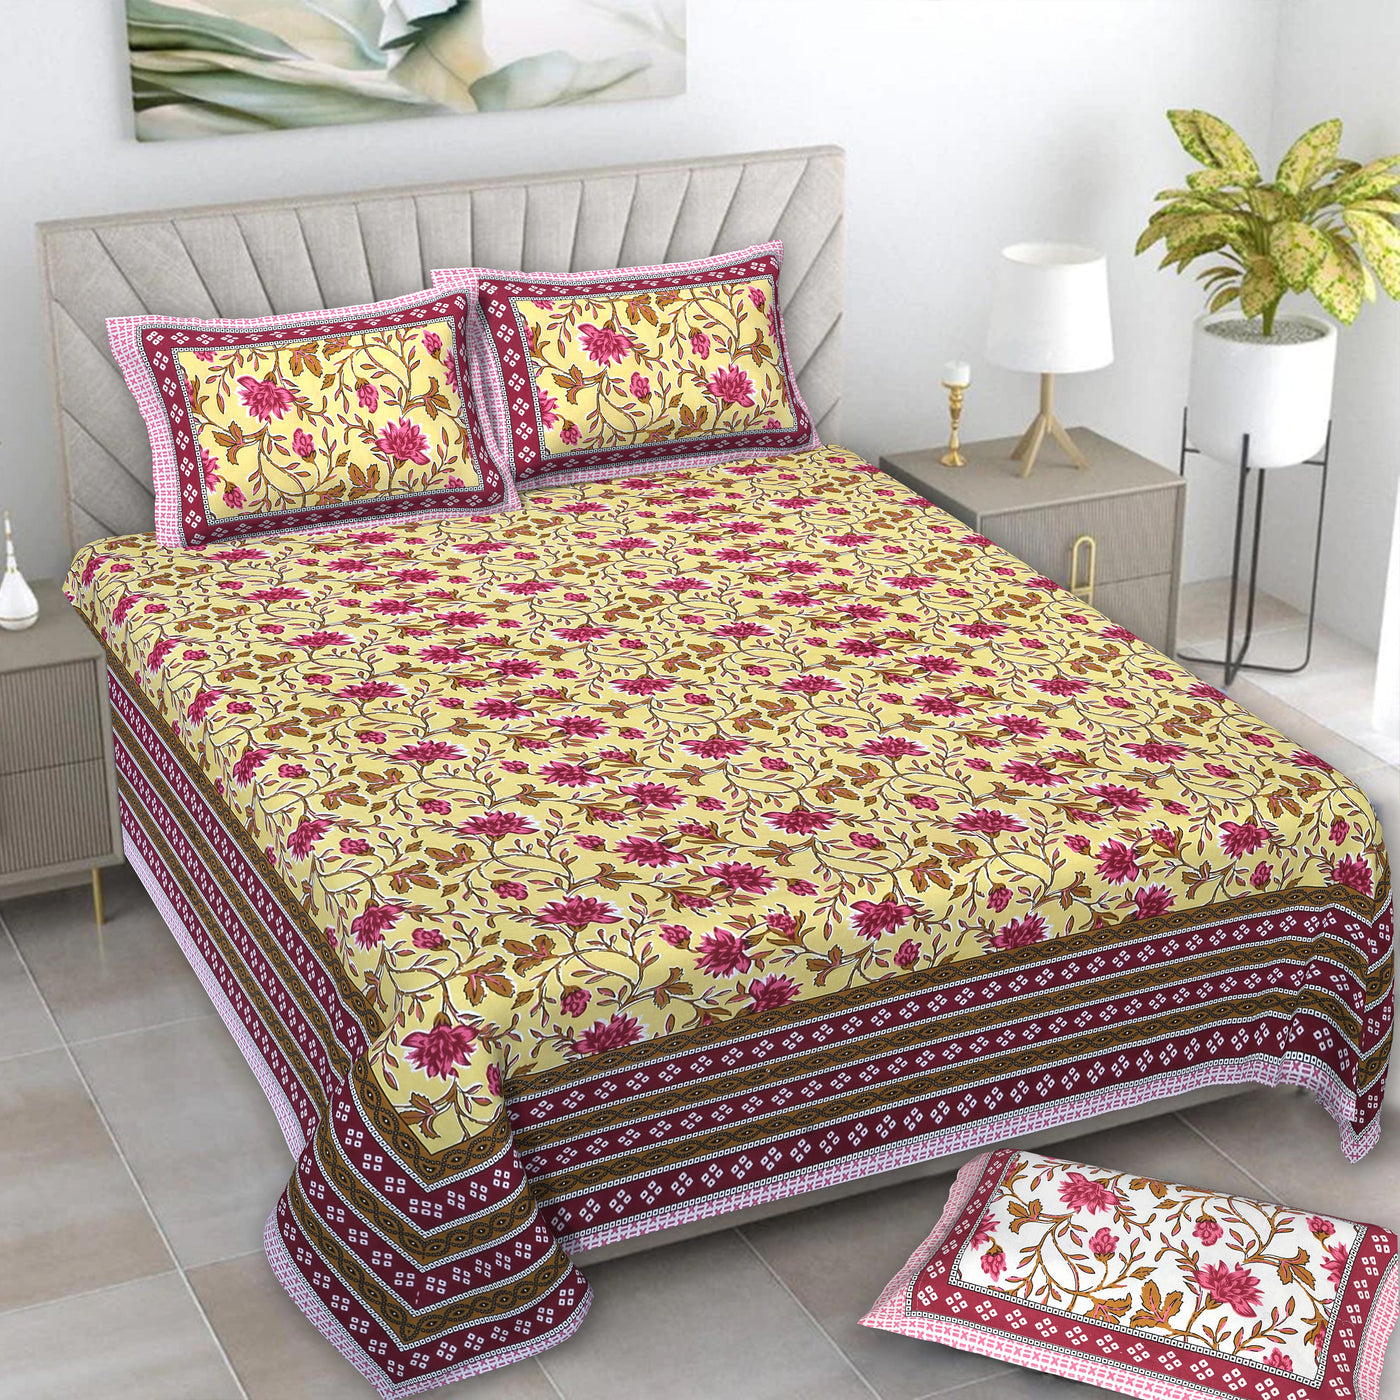 Wanderlust Premium | Full Size 87 x 104 in | 100% Pure Cotton | Double Bedsheet with 2 Pillow Covers (PKC14)